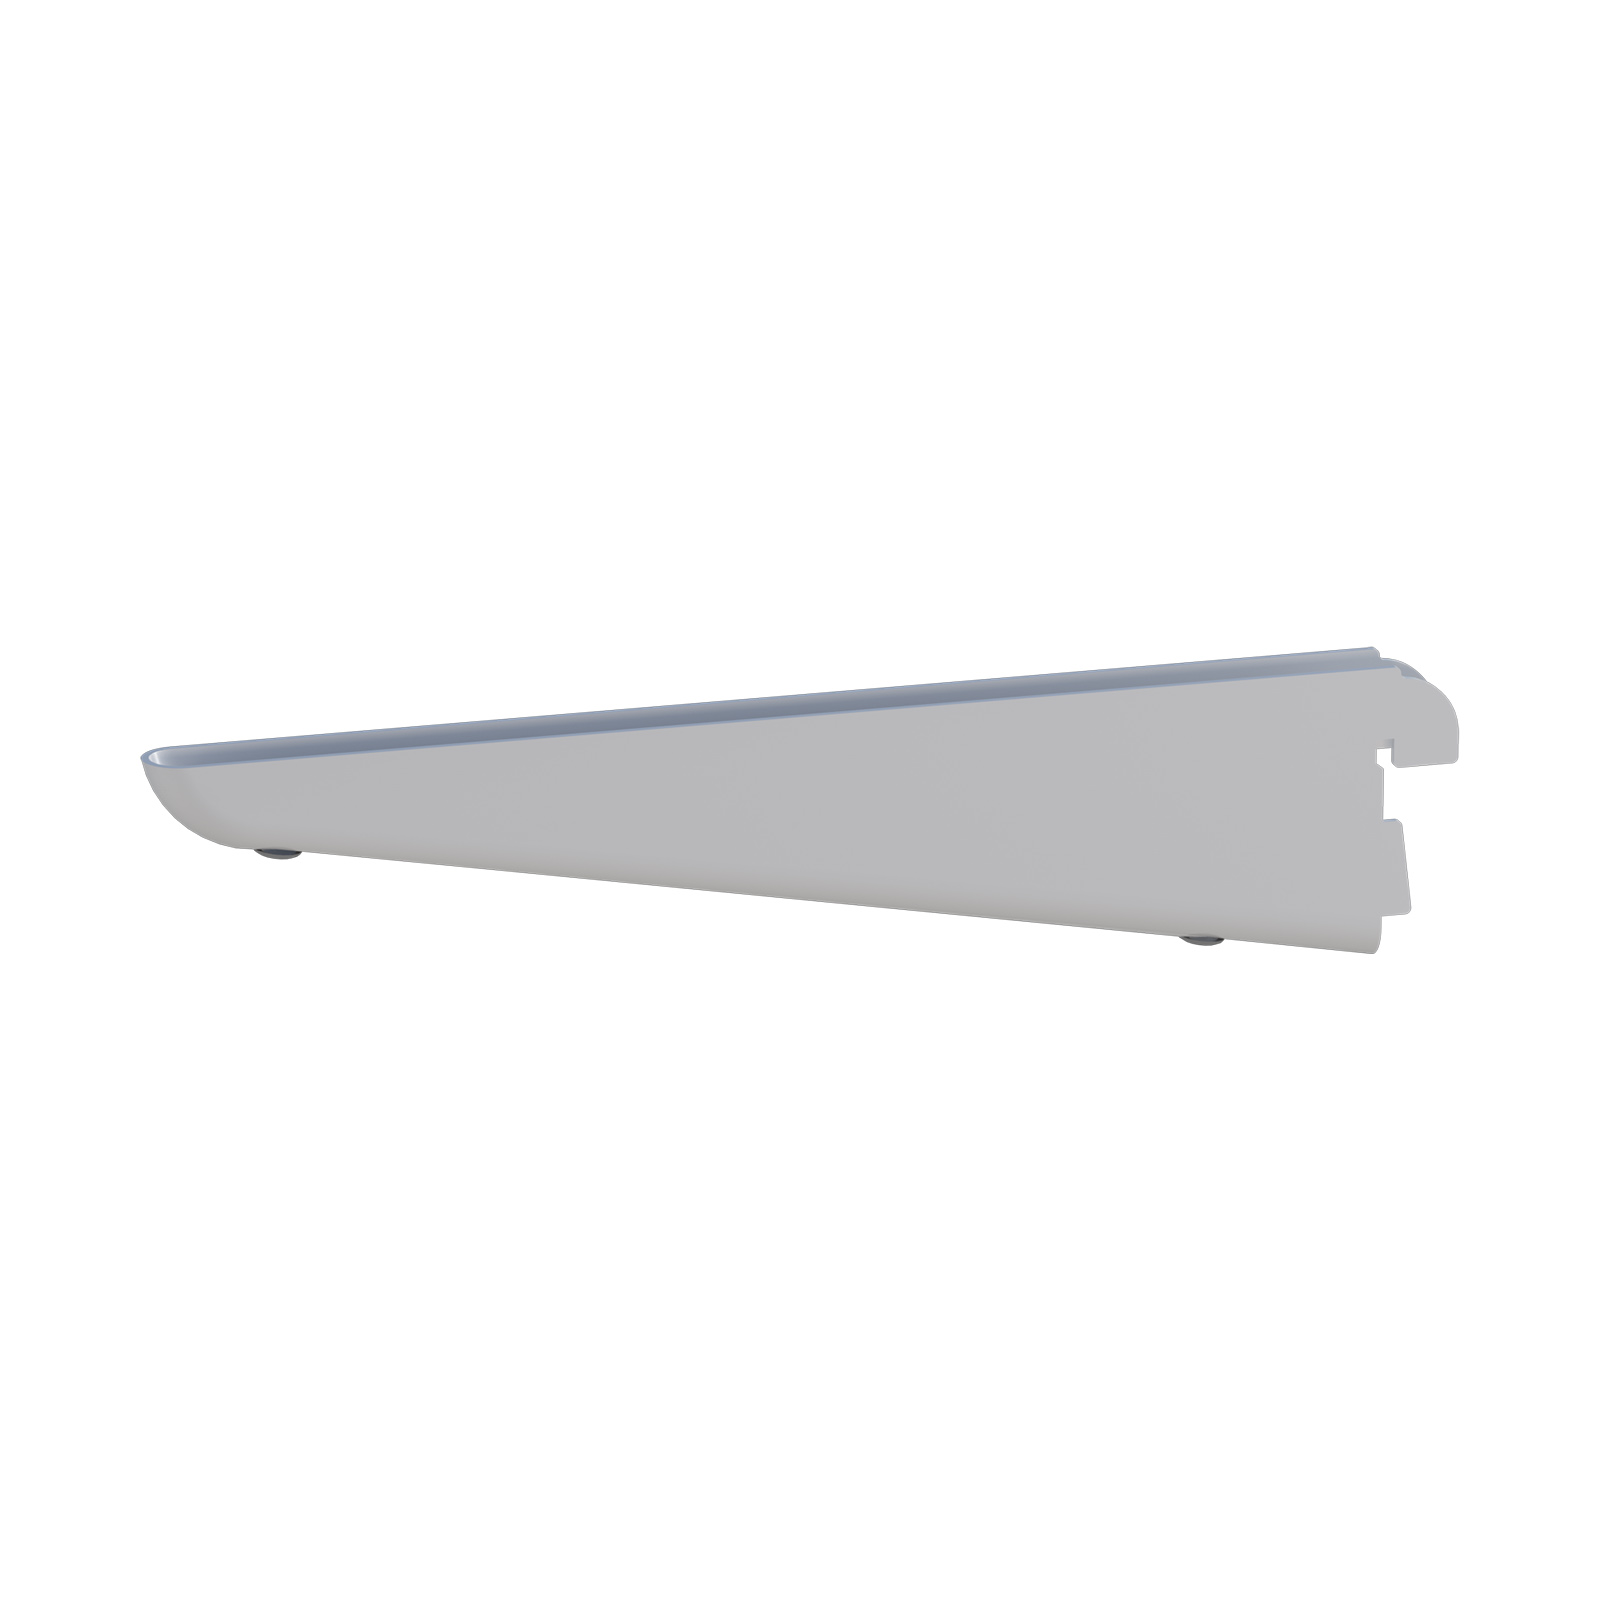 Home Solutions Double Slot Bracket White 220mm